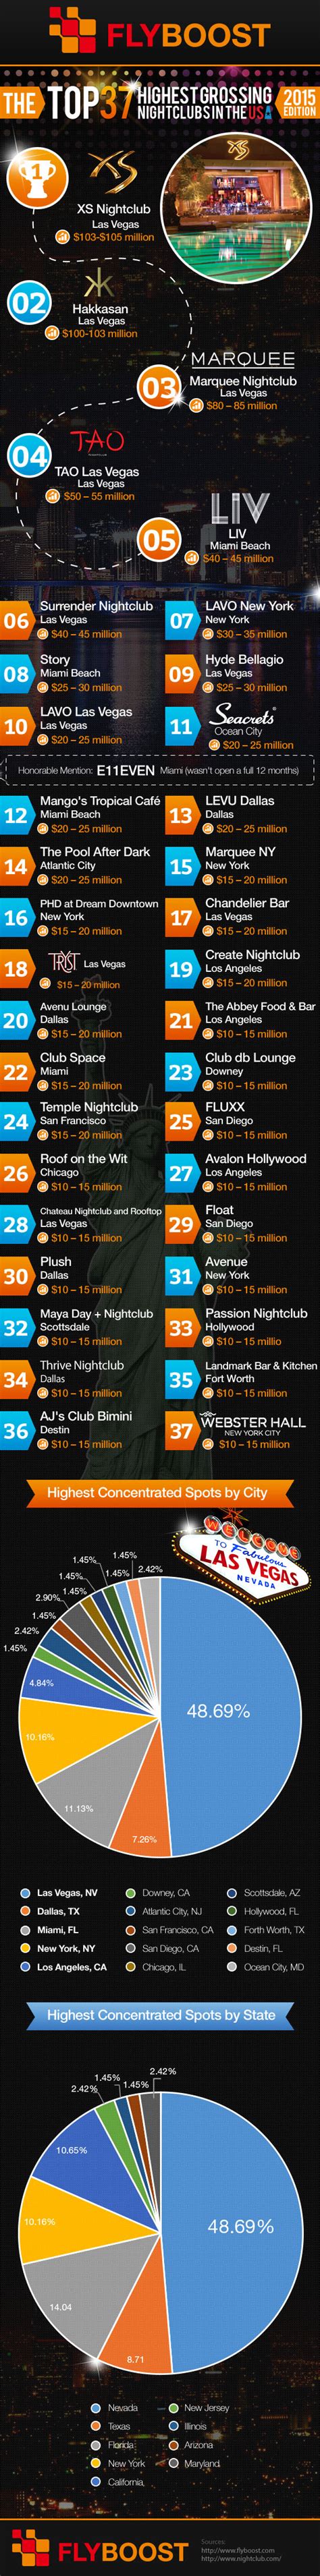 The Top 37 Highest Grossing Nightclubs In The Usa 2015 Infographic